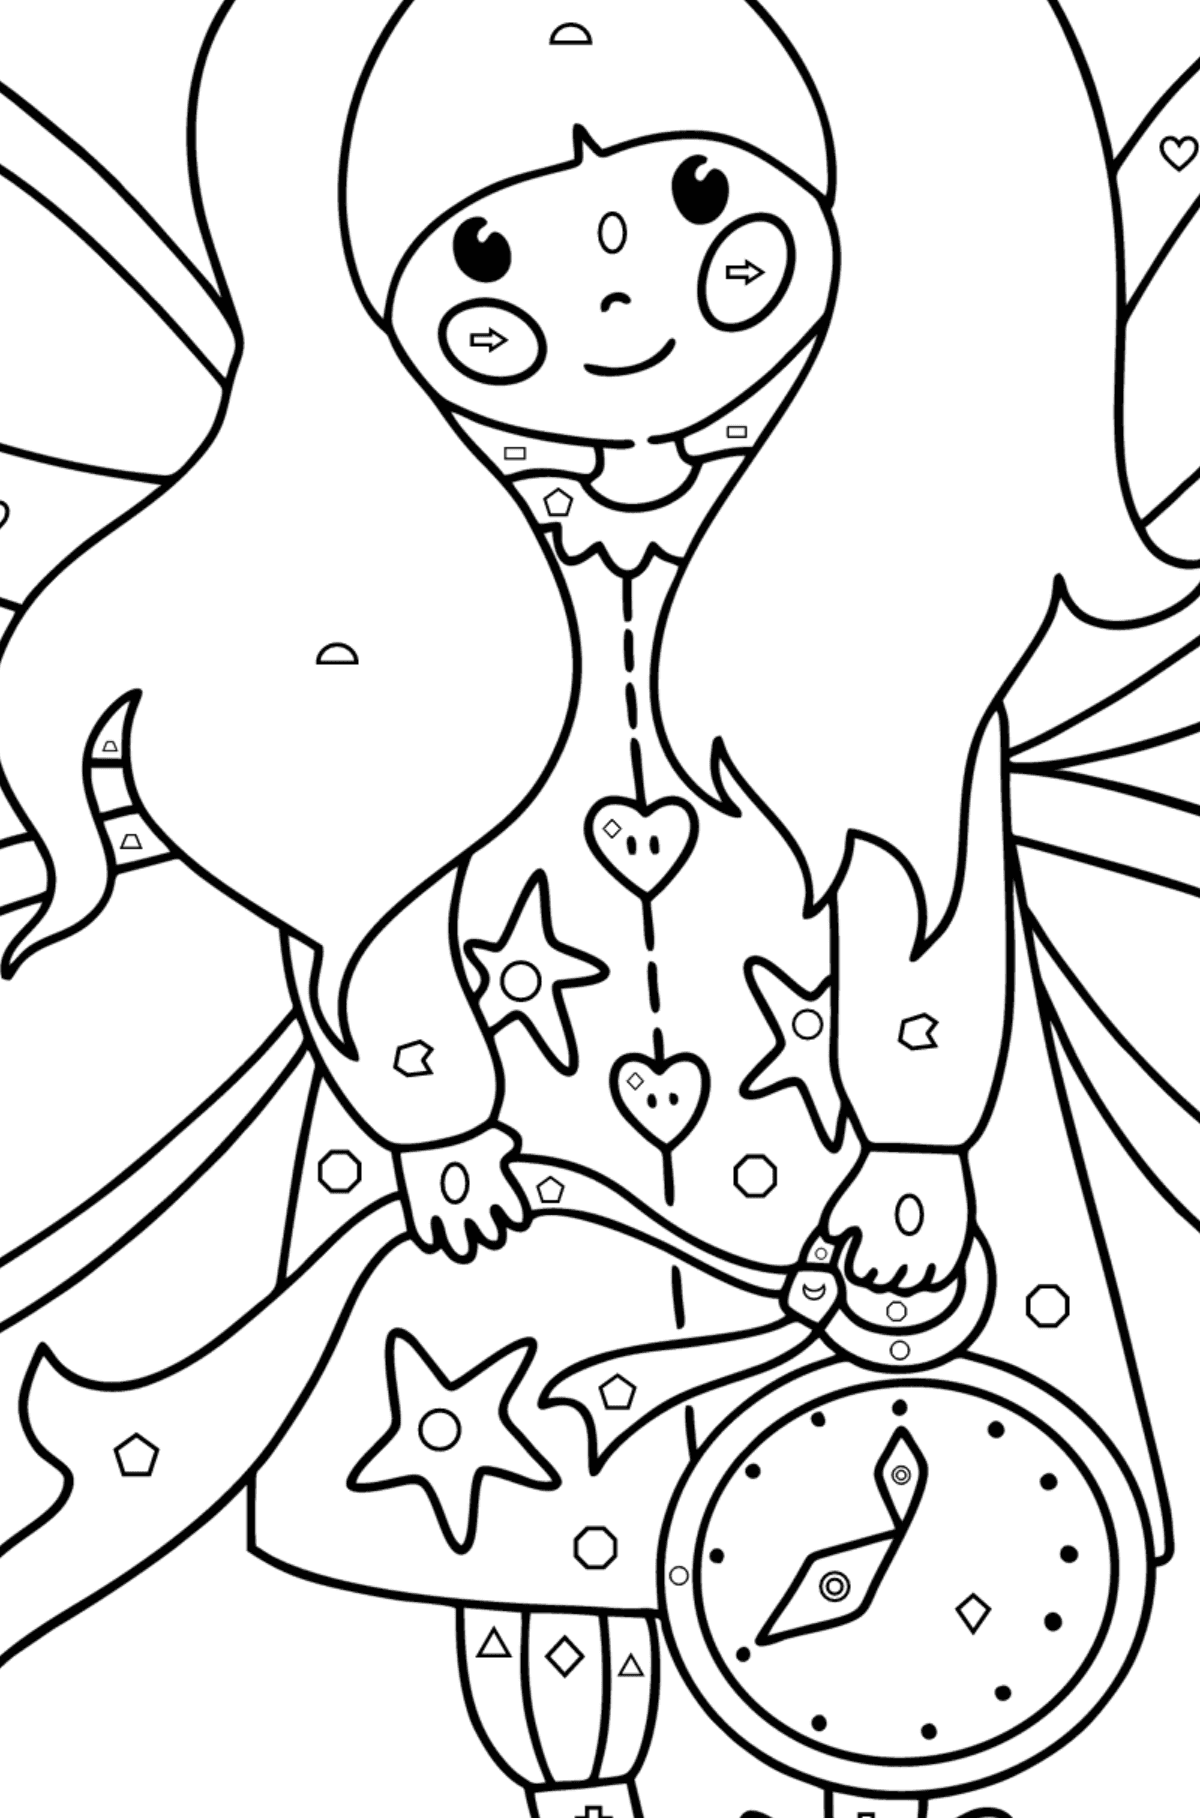 Sweet Fairy coloring page - Coloring by Geometric Shapes for Kids